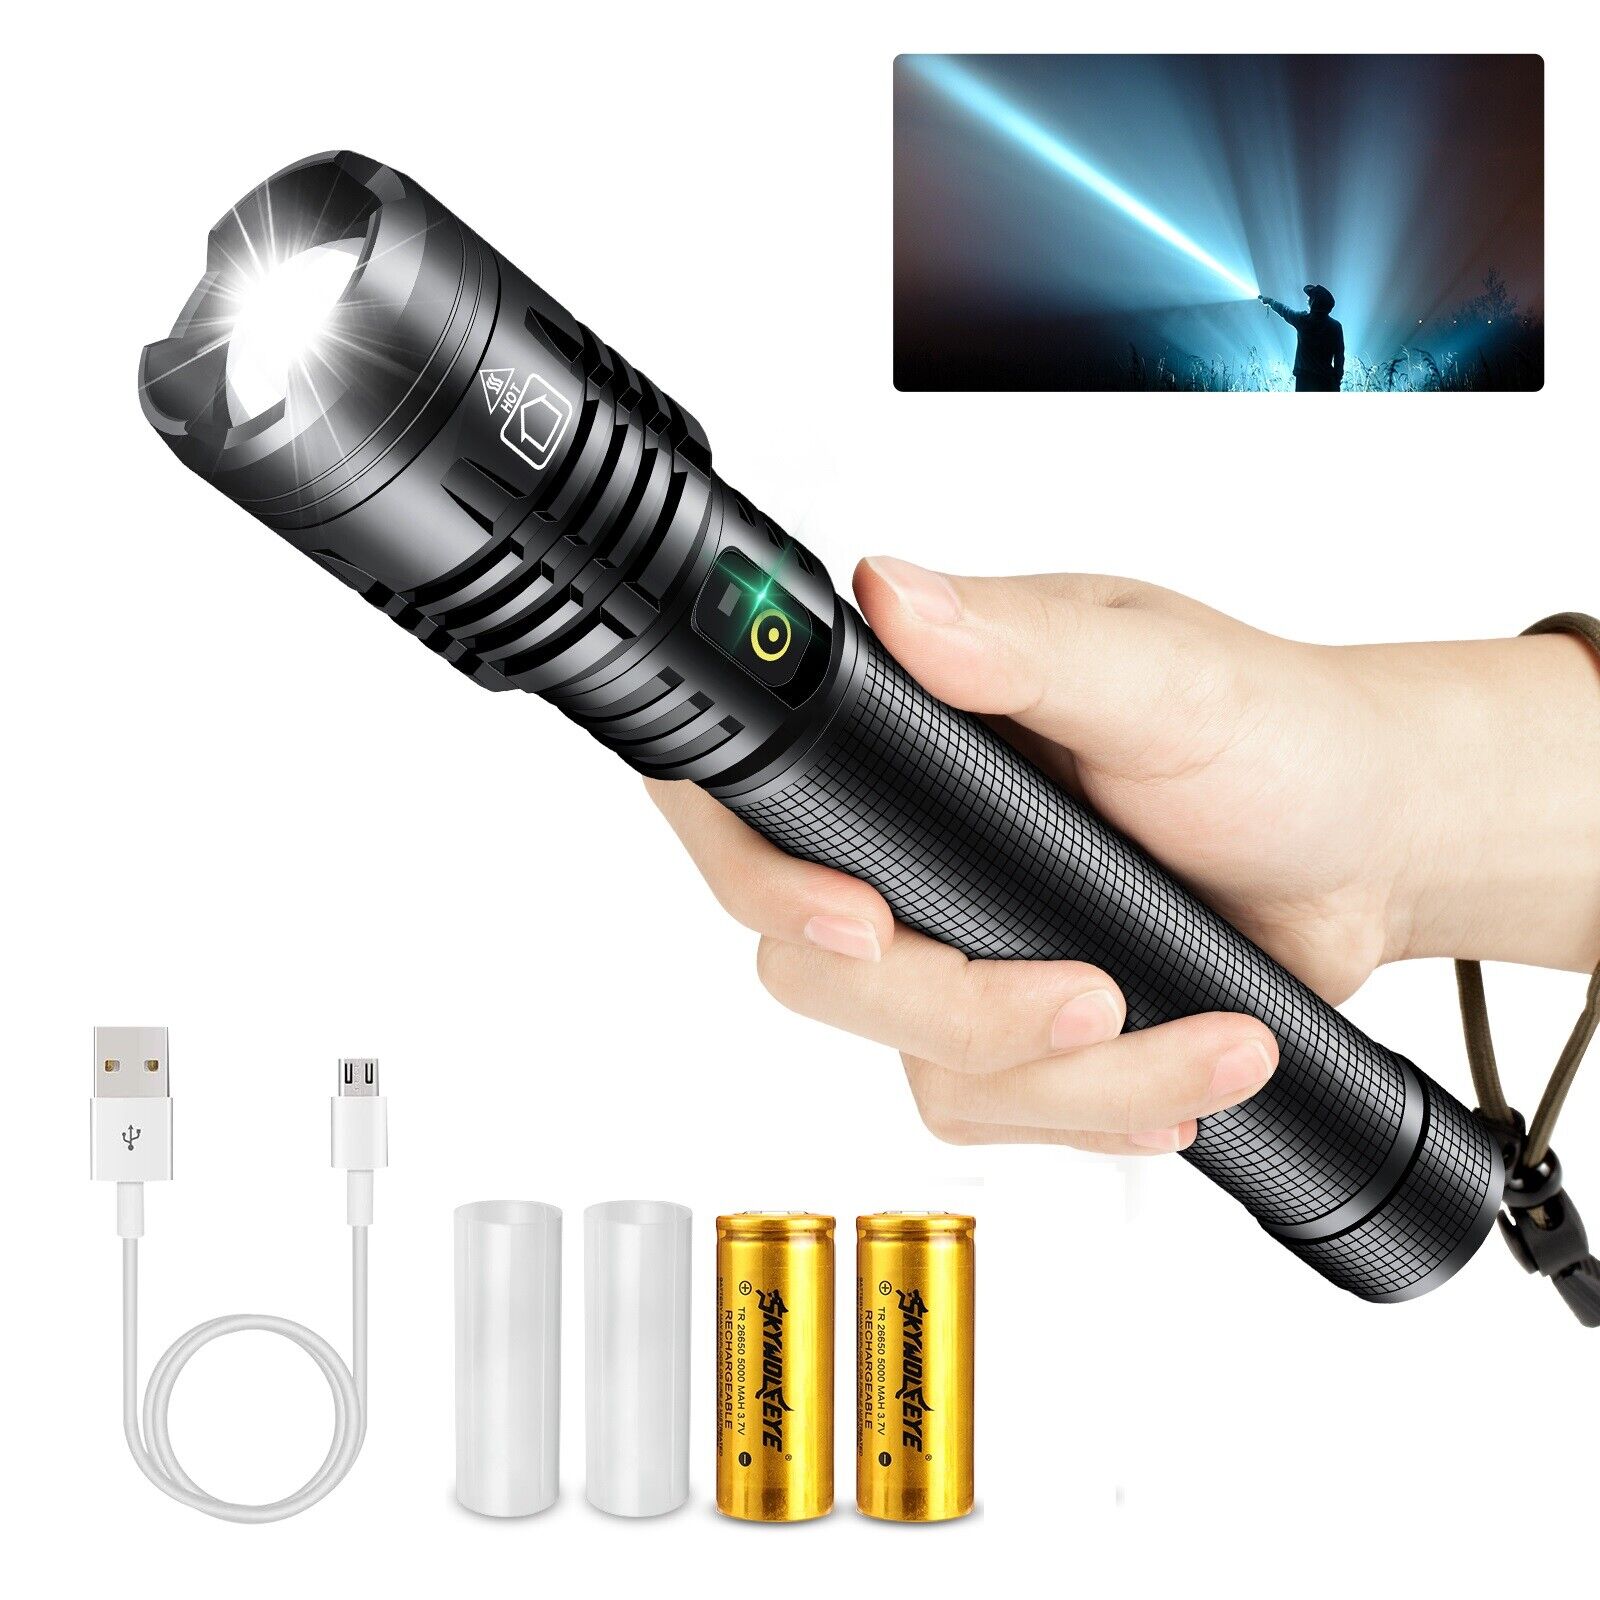 Super Bright 990000LM Powerful LED Flashlight USB Rechargeable Zoomable Torch